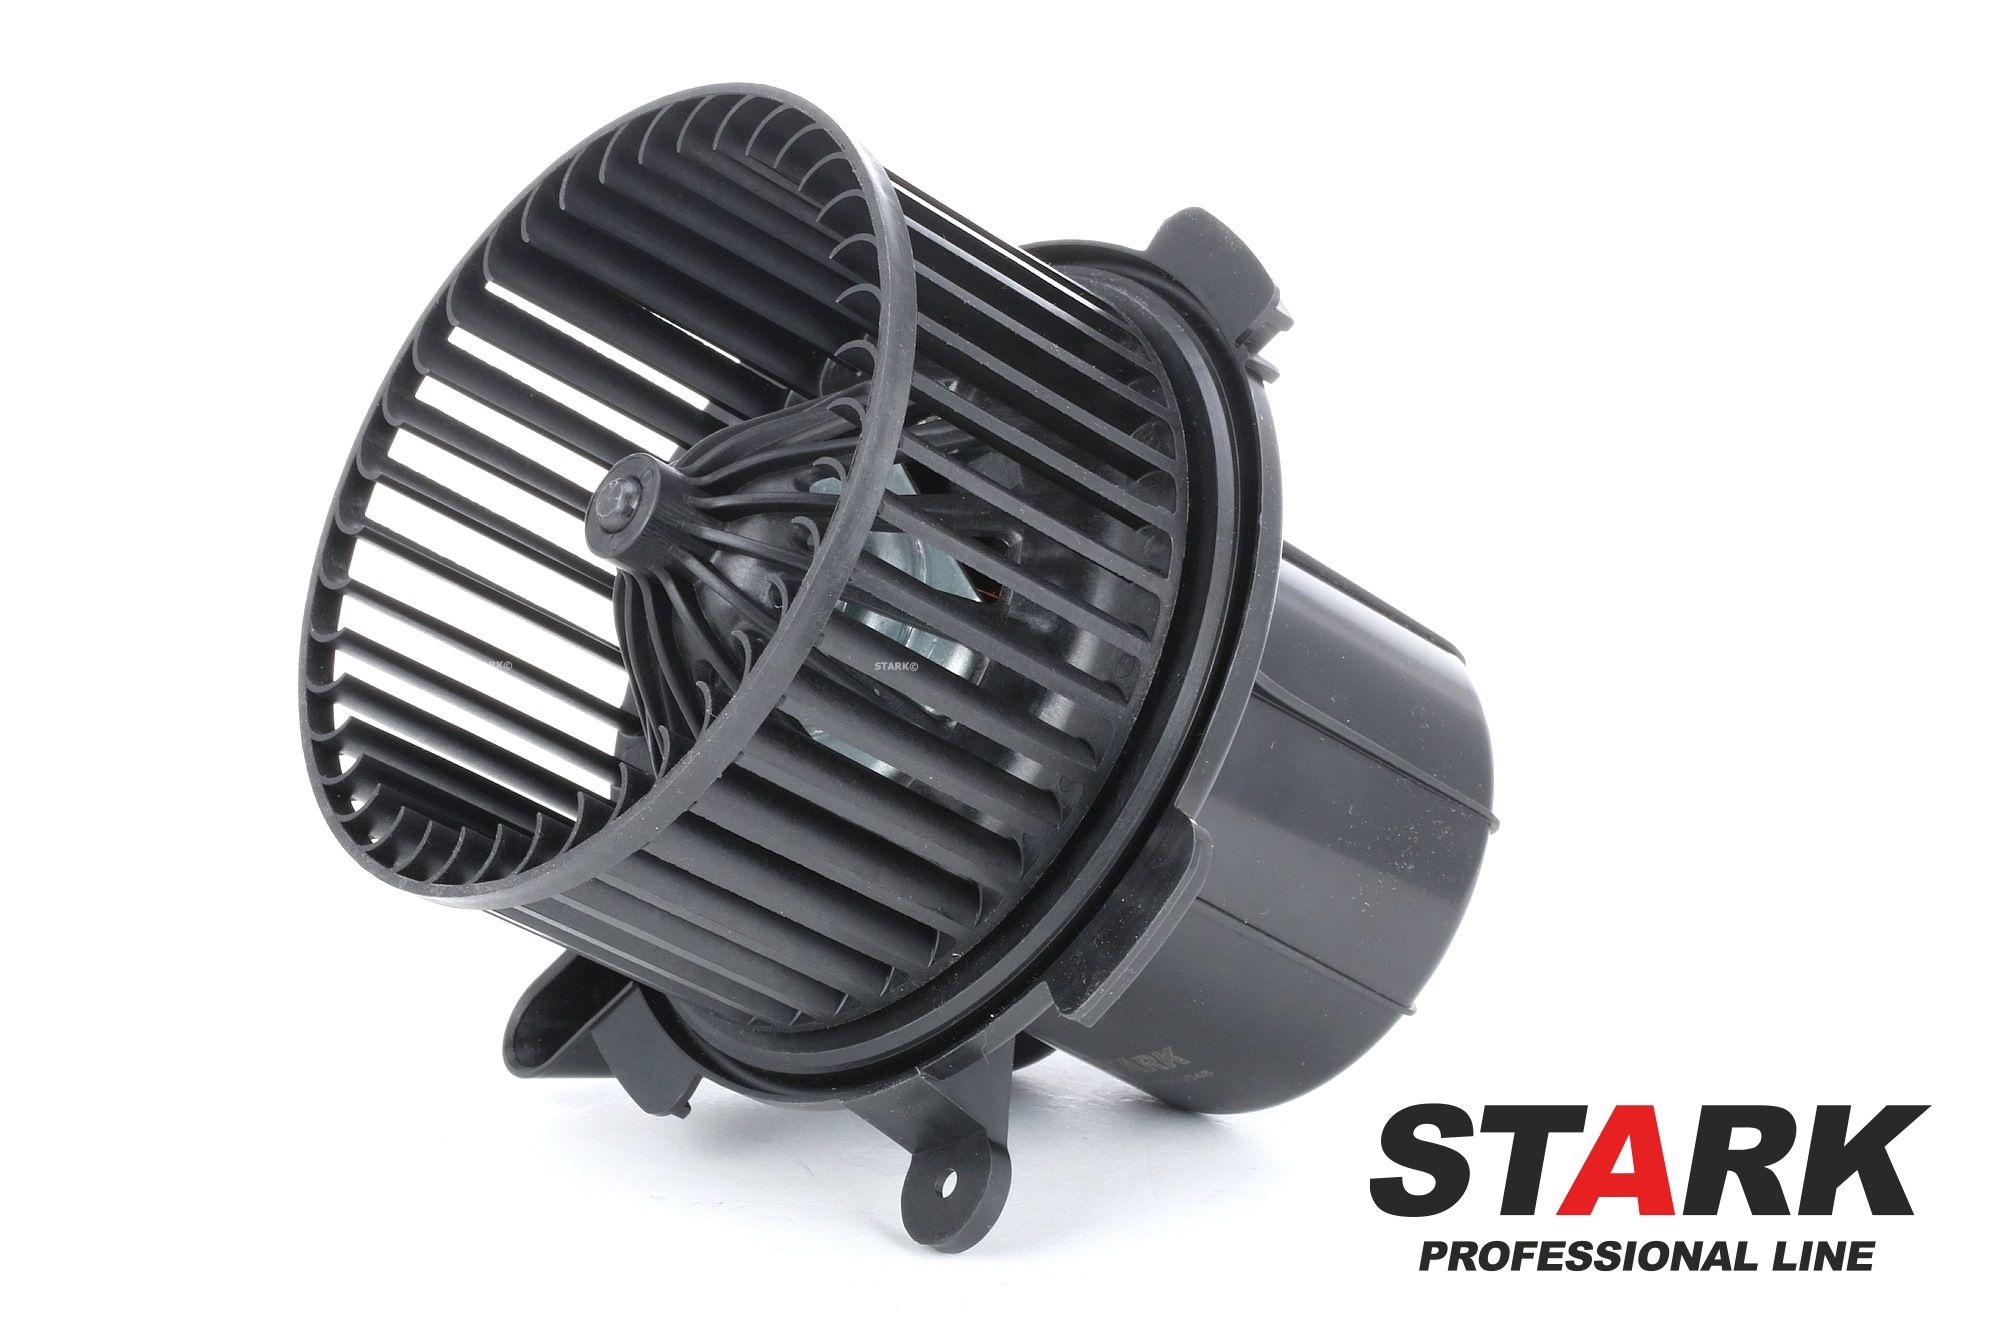 SKIB-0310046 STARK Heater blower motor CITROËN for vehicles with automatic climate control, for vehicles with air conditioning, for vehicles with CAN bus system, without integrated regulator